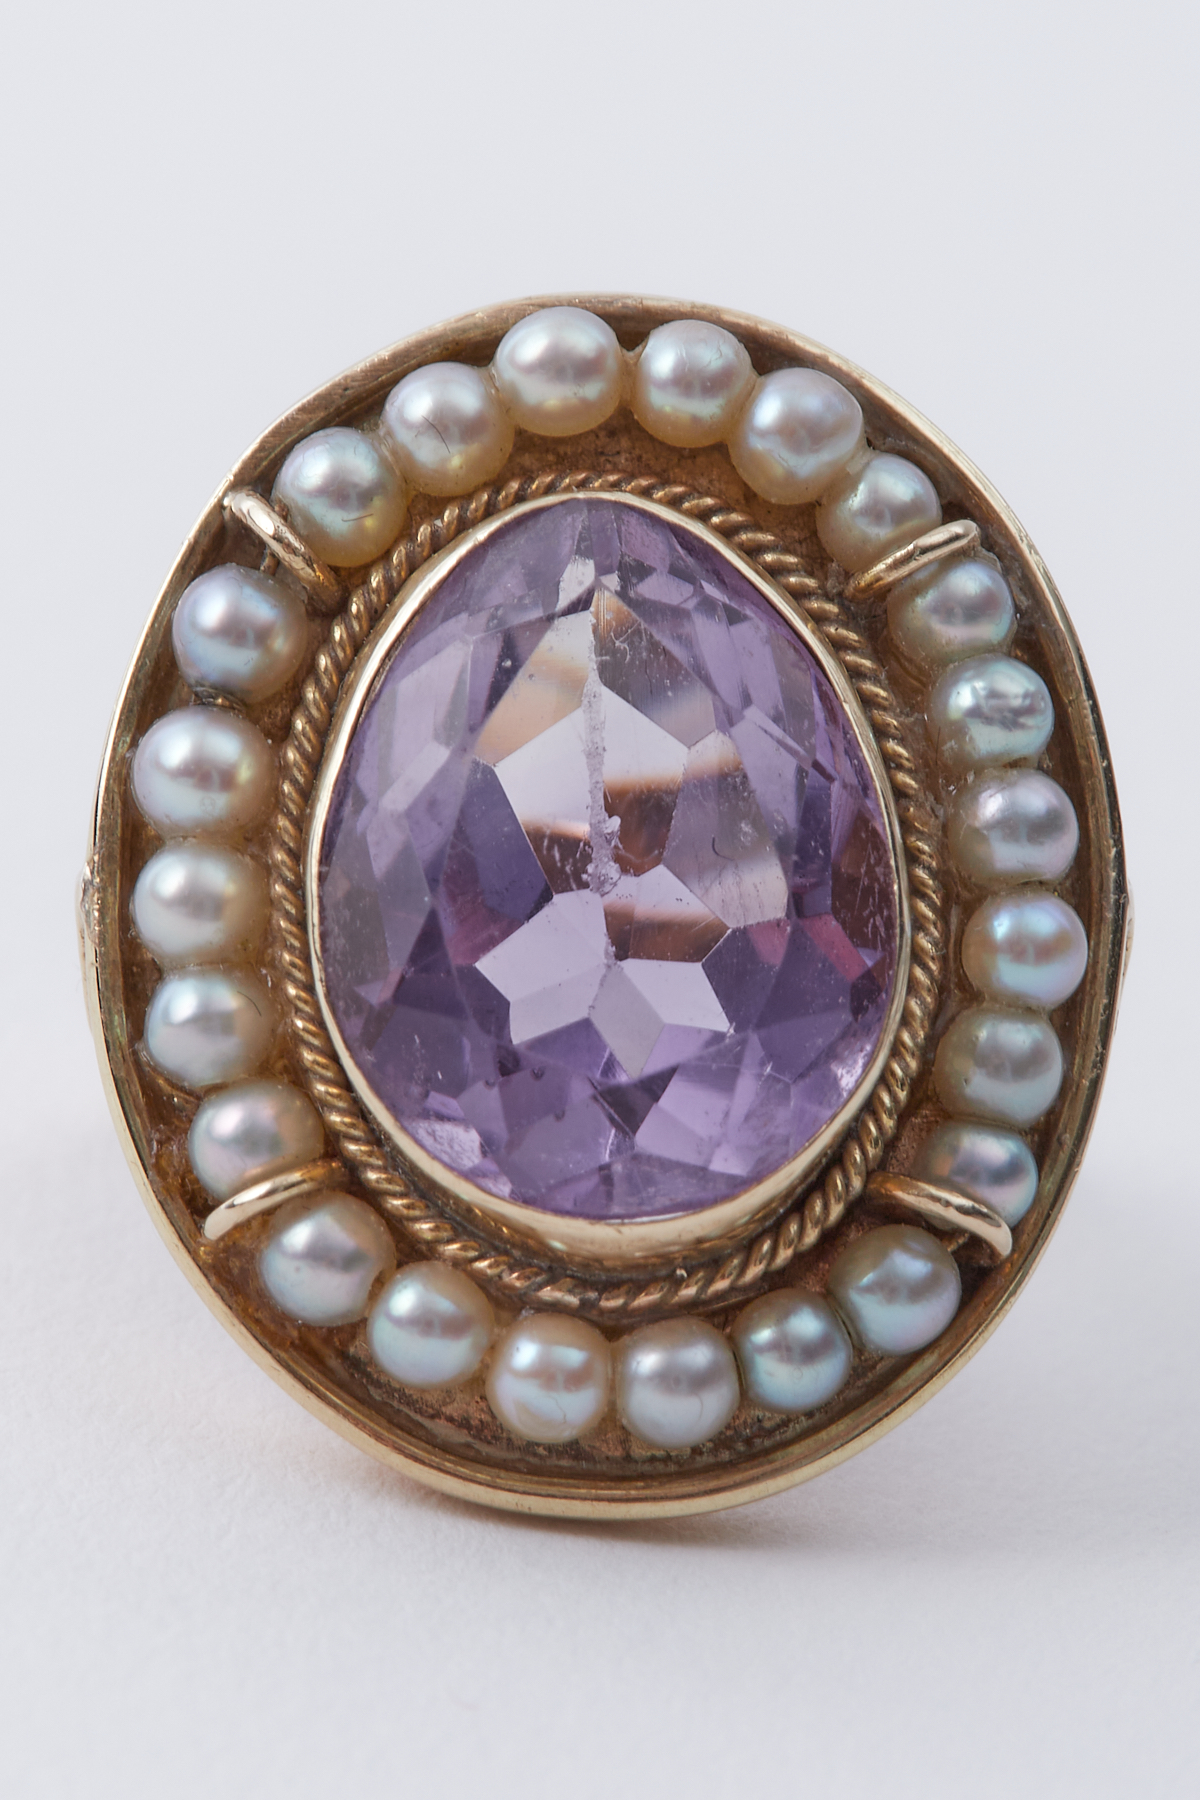 A 14k yellow gold ring set with a central pear shaped amethyst, approx. 7.14 carats, surrounded by - Image 2 of 2